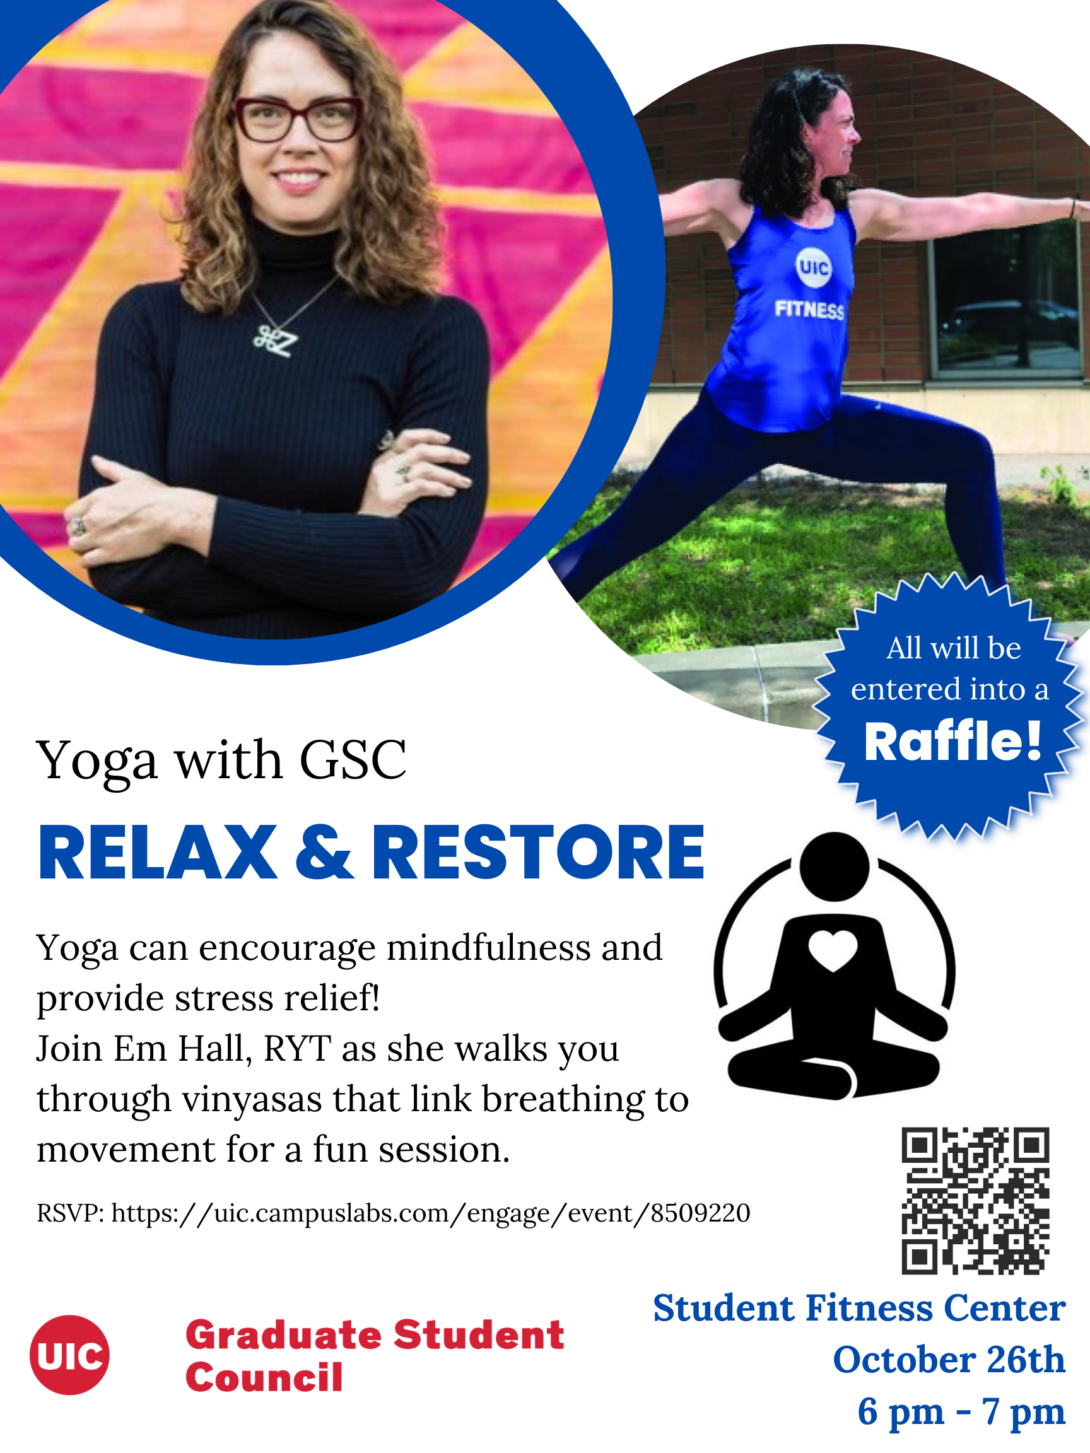 When: Wednesday October 26, from 6-7pm  Where: Student fitness Center    All details can be found on the attached flyer! If interested, you will need to RSVP to the yoga event - you can do so with this link: https://uic.campuslabs.com/engage/event/8509220